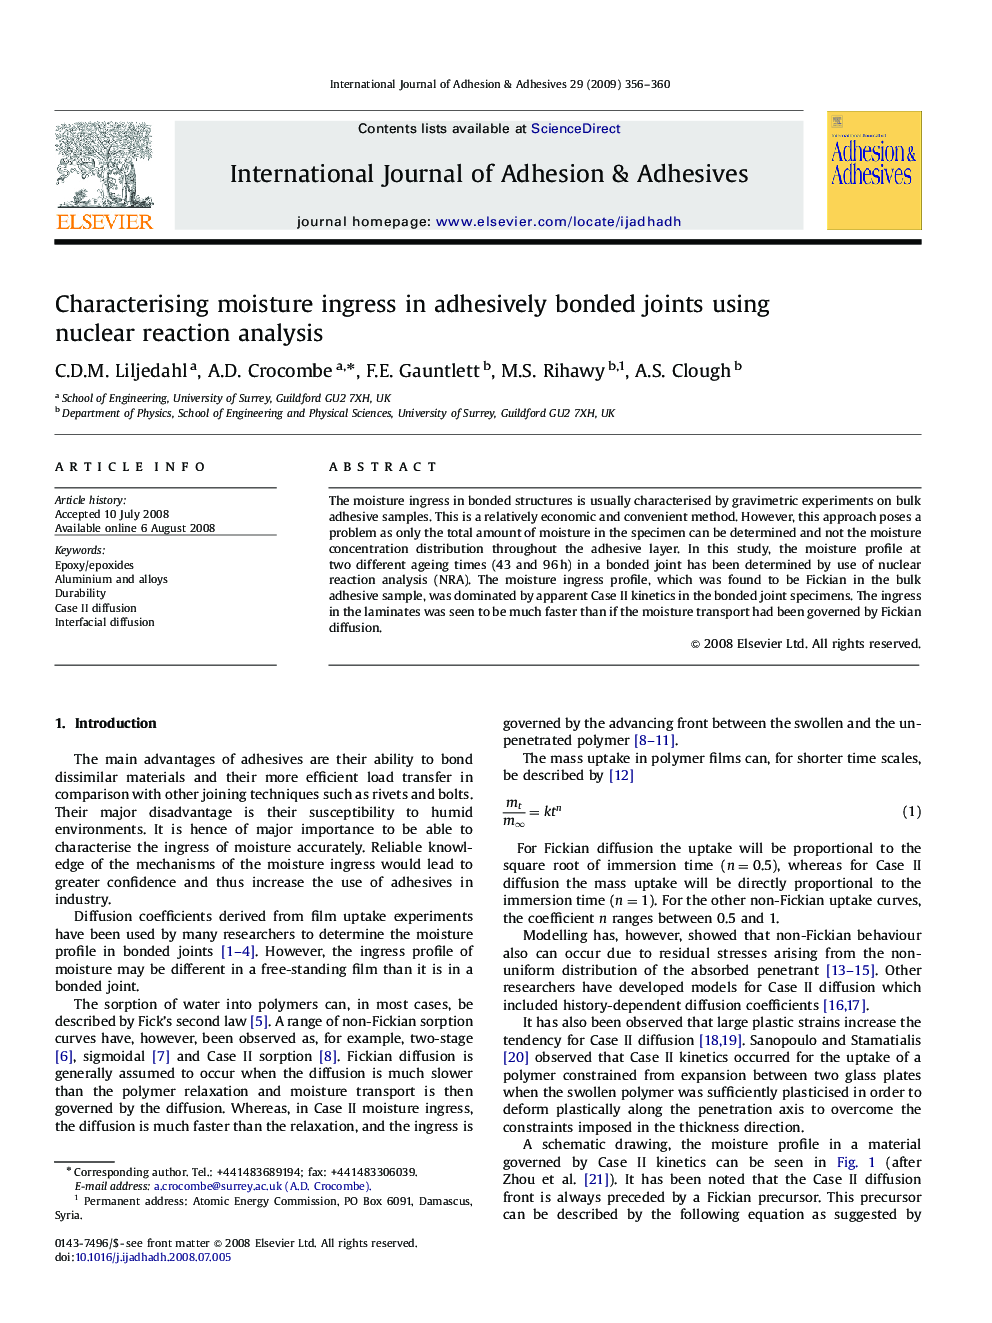 Characterising moisture ingress in adhesively bonded joints using nuclear reaction analysis